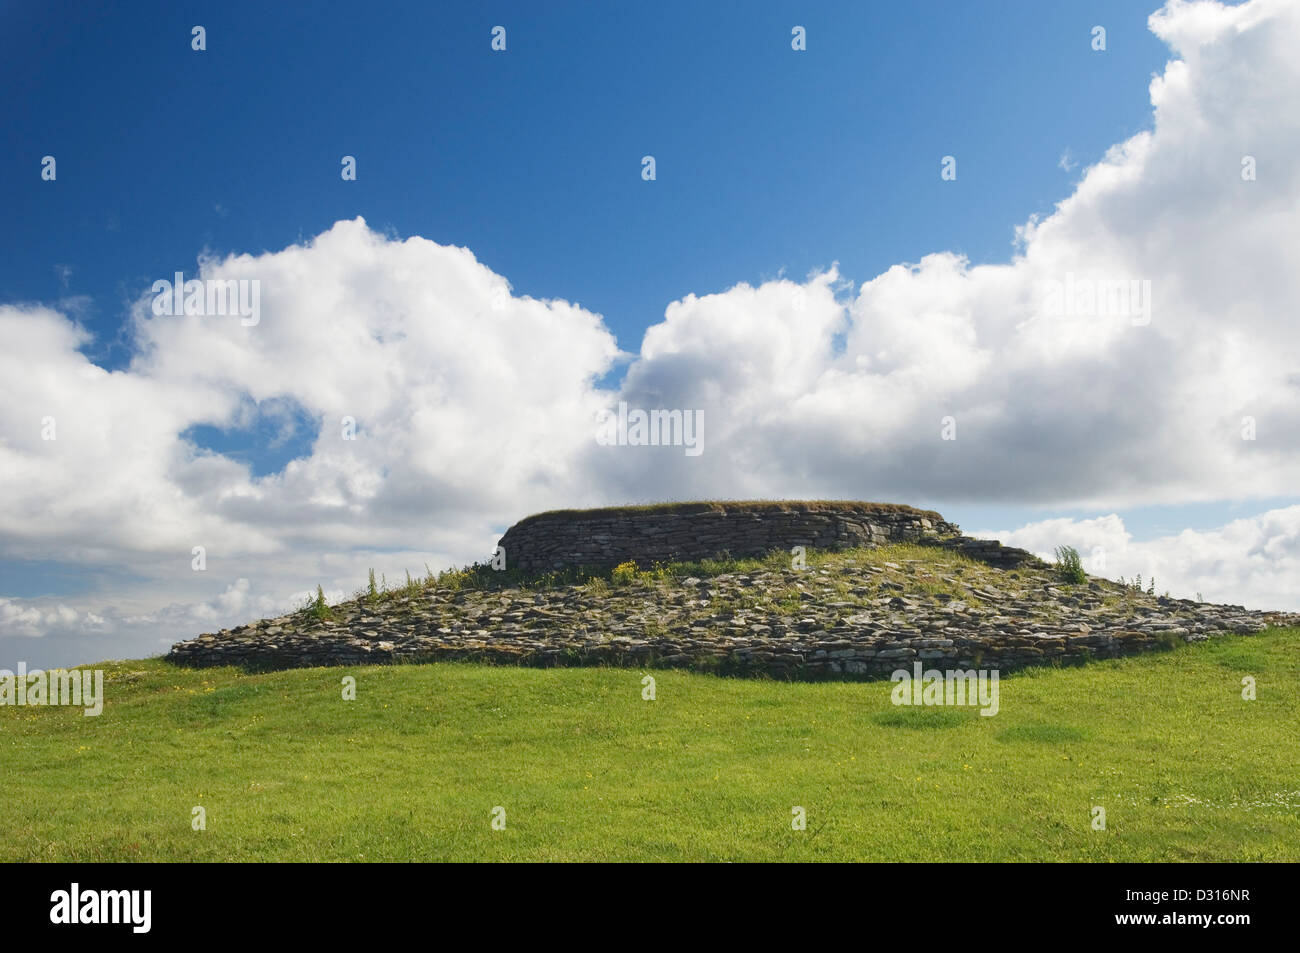 Quoyness chambered cairn on the island of Sanday, Orkney Islands, Scotland. Stock Photo